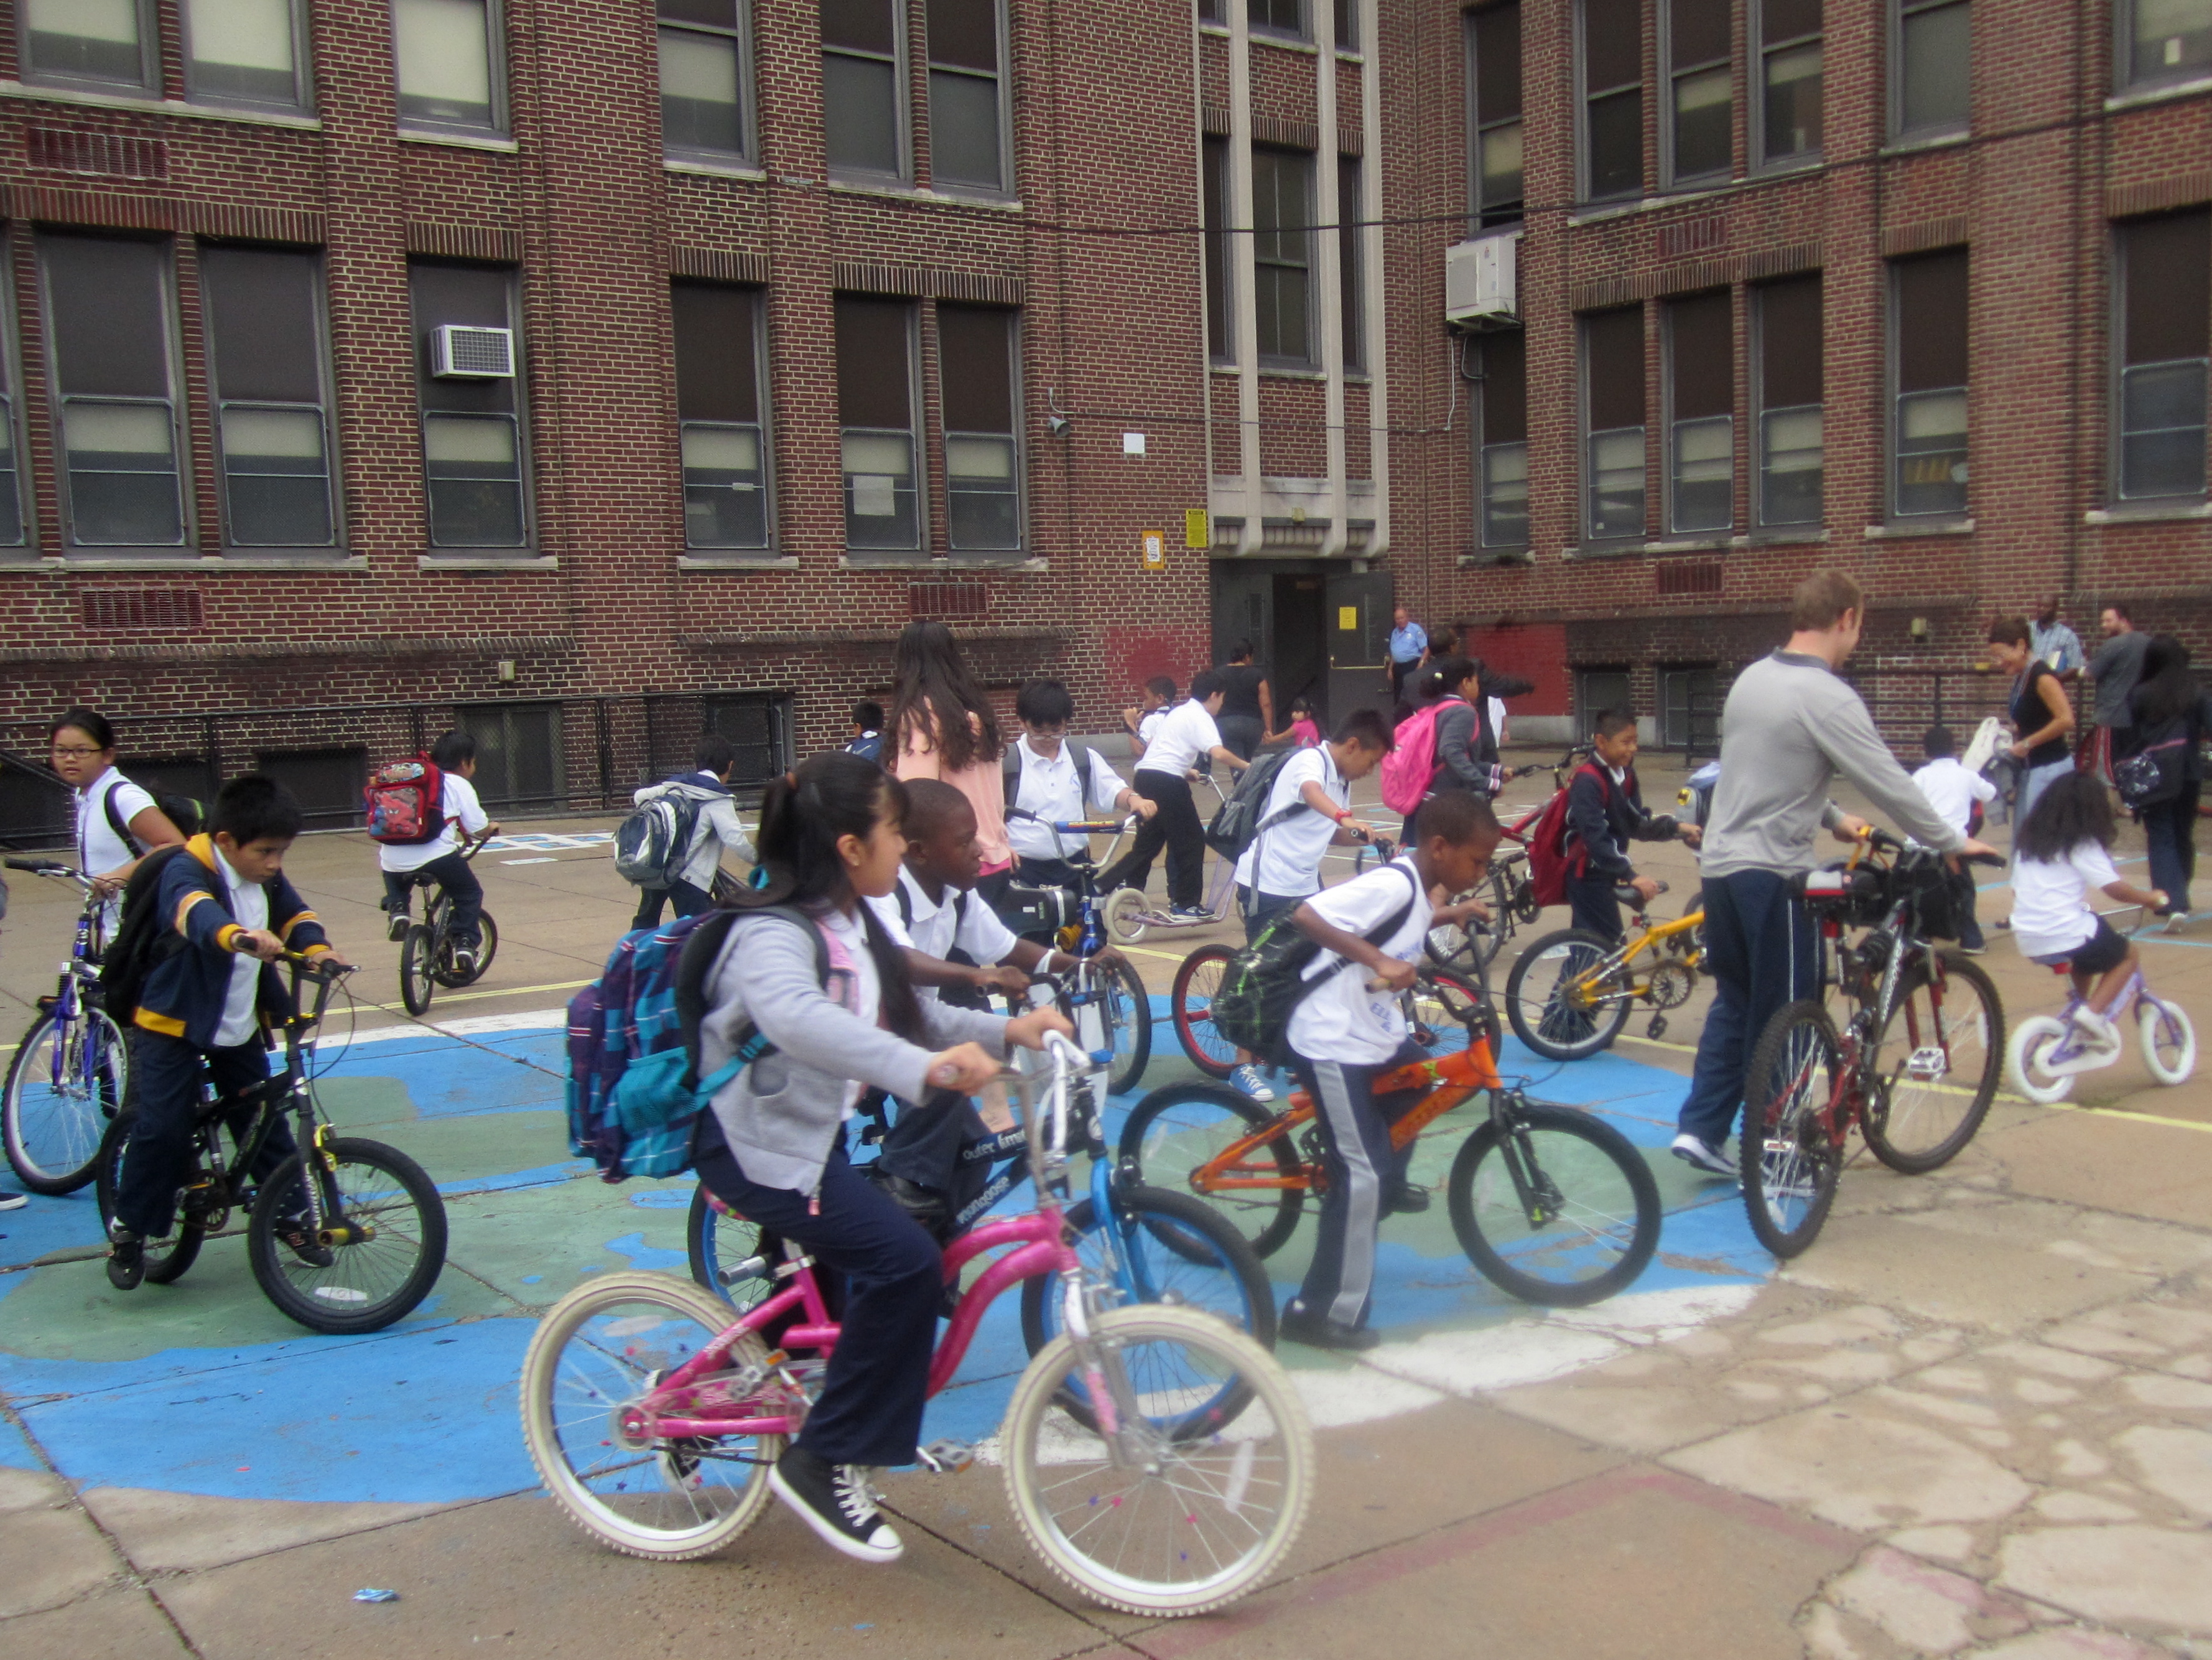 Students gathered in the George Washington Elementary School courtyard after walking and biking to school Thursday.